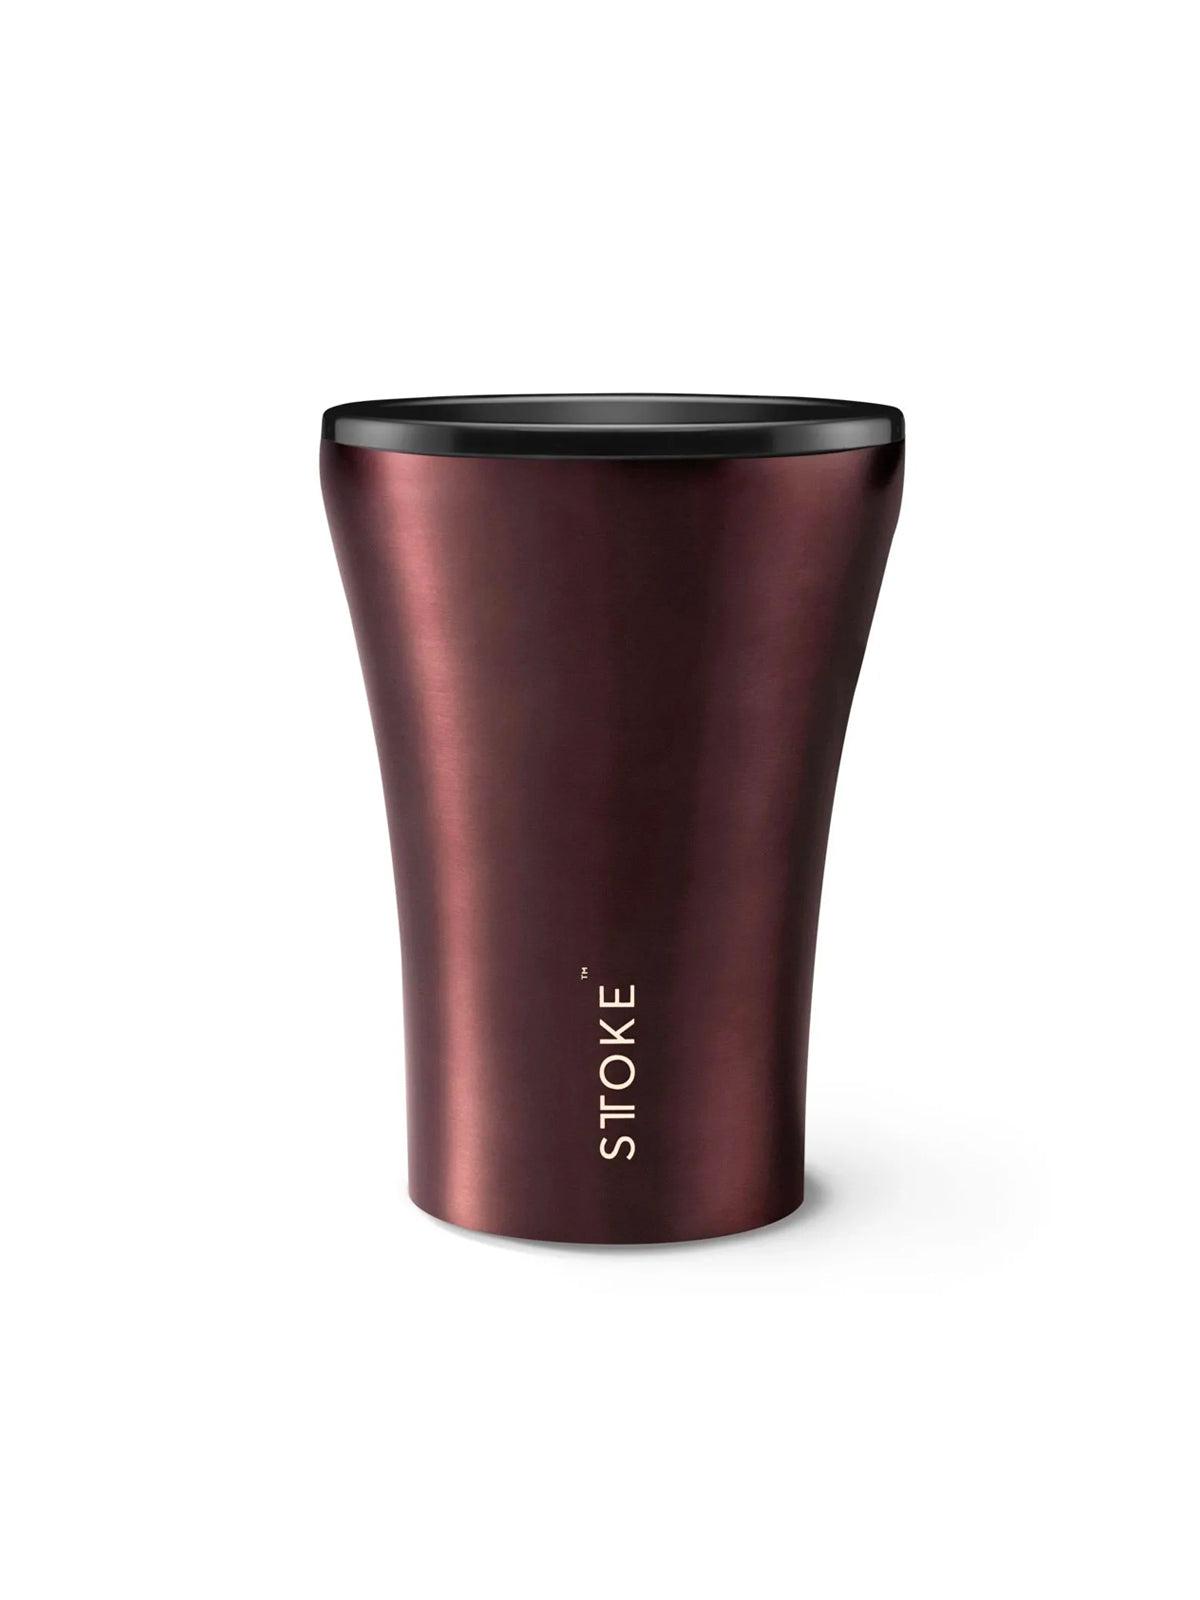 Sttoke Limited Edition Insulated Ceramic Cup 8oz Rustic Brown